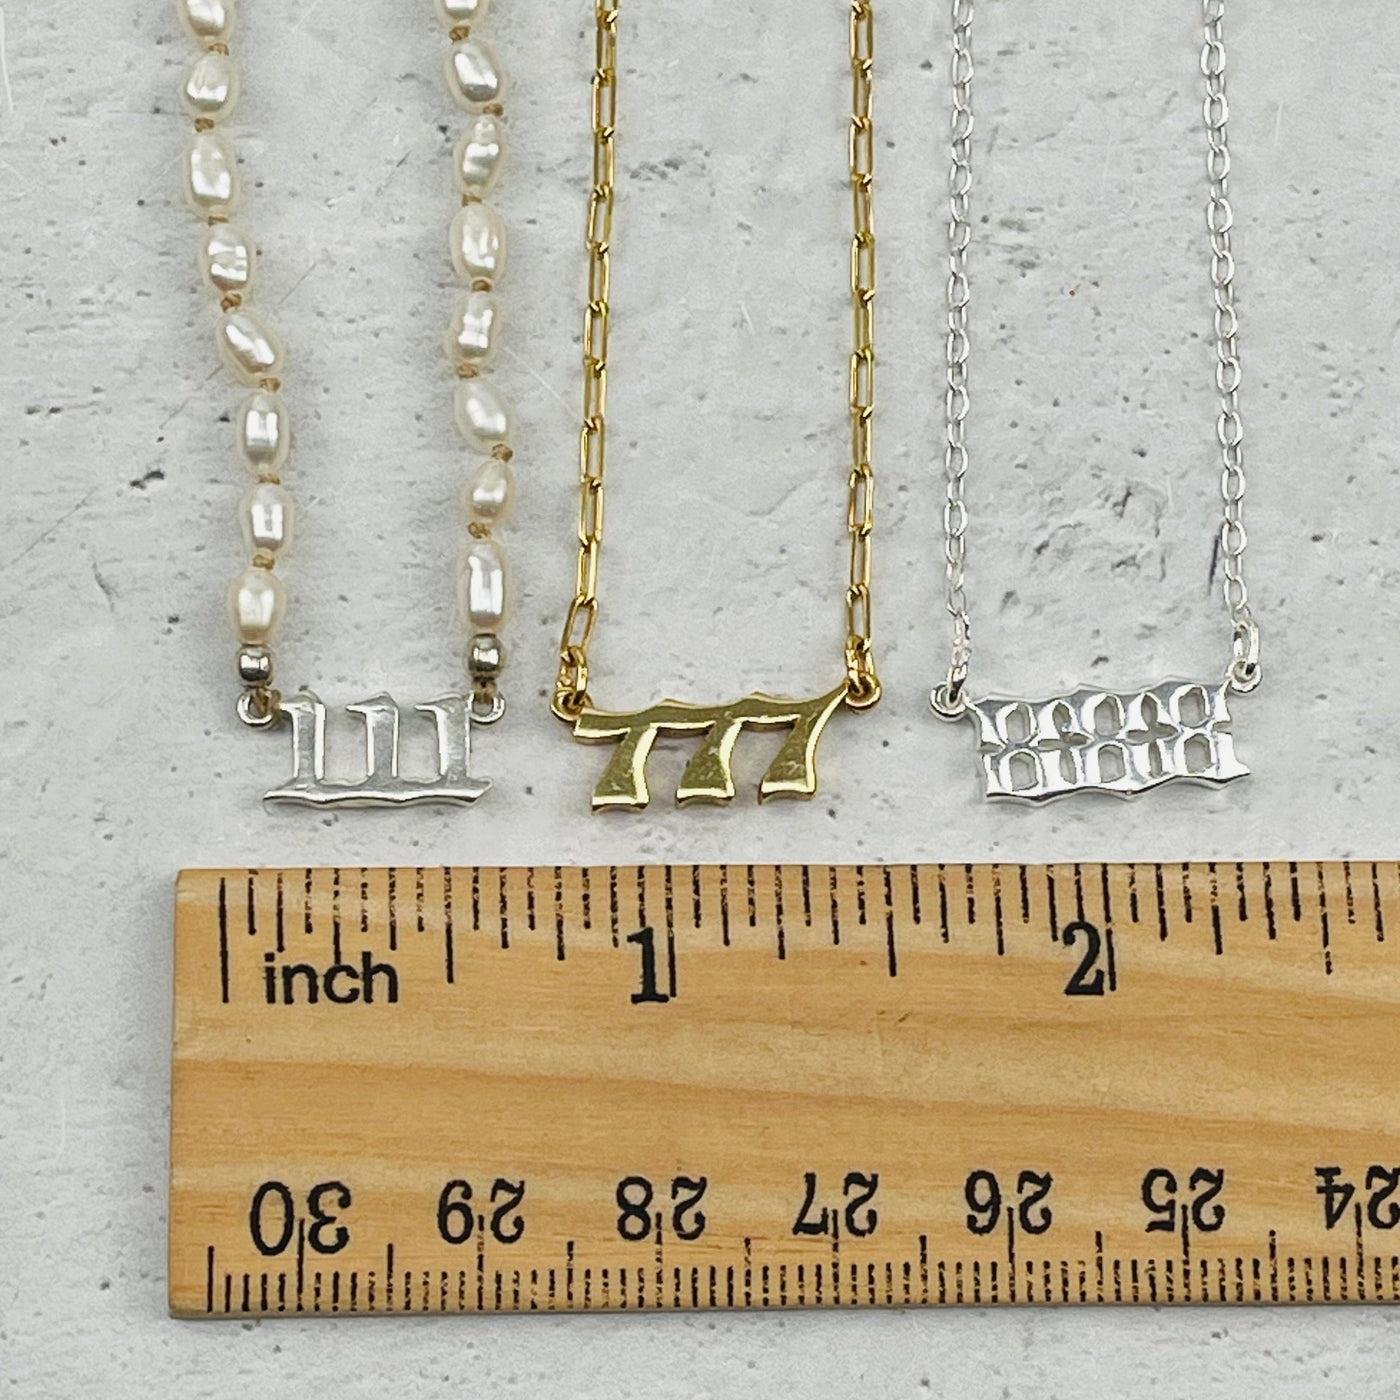 charms next to a ruler for size reference 